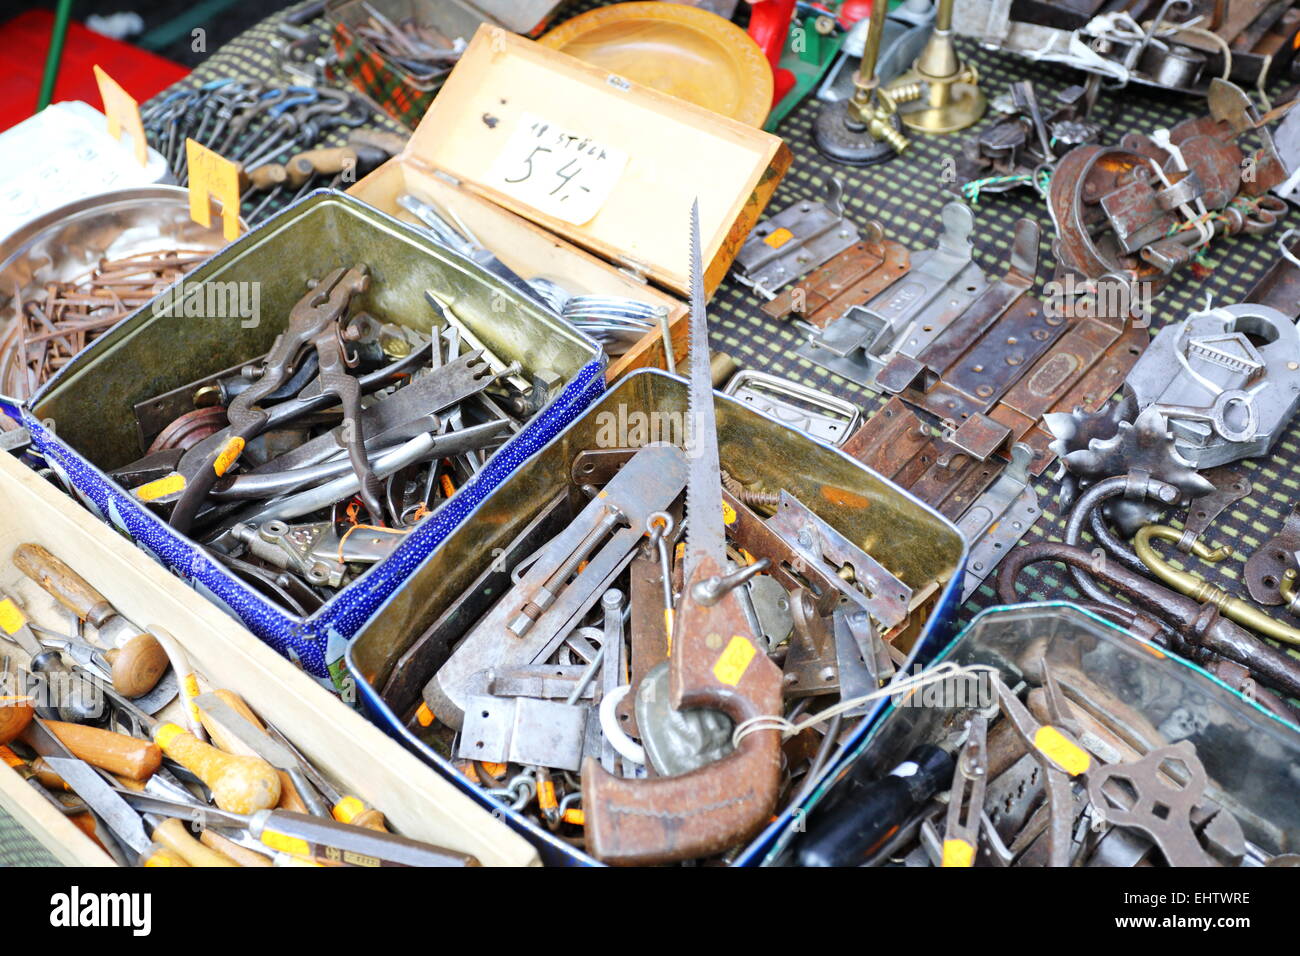 Old tools and hardware on the flea market. Stock Photo